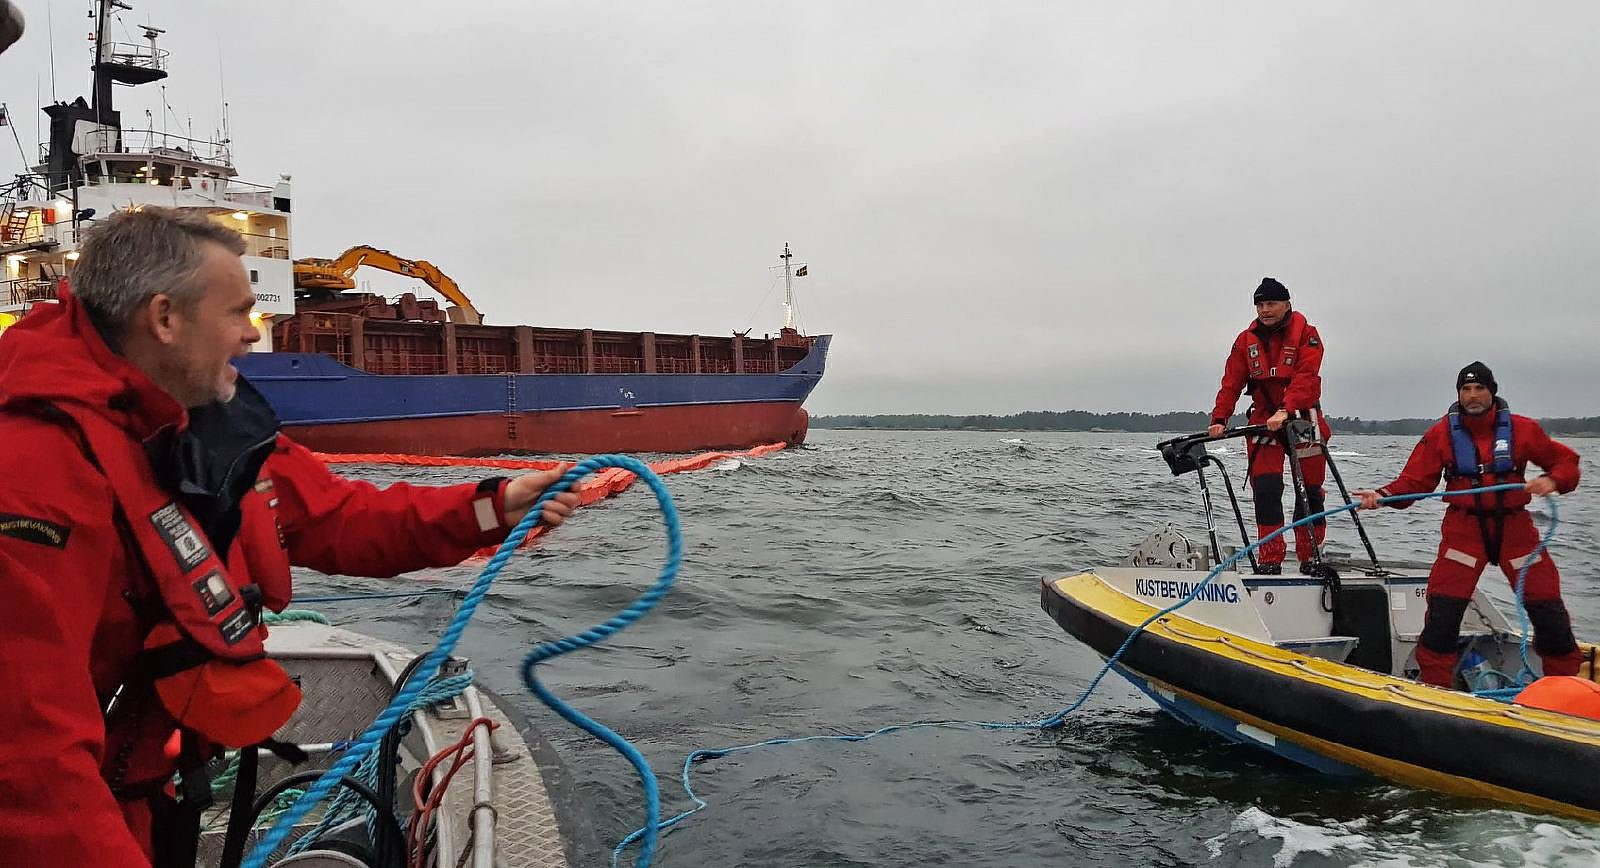 Two arrested after cargo ship grounds off Sweden